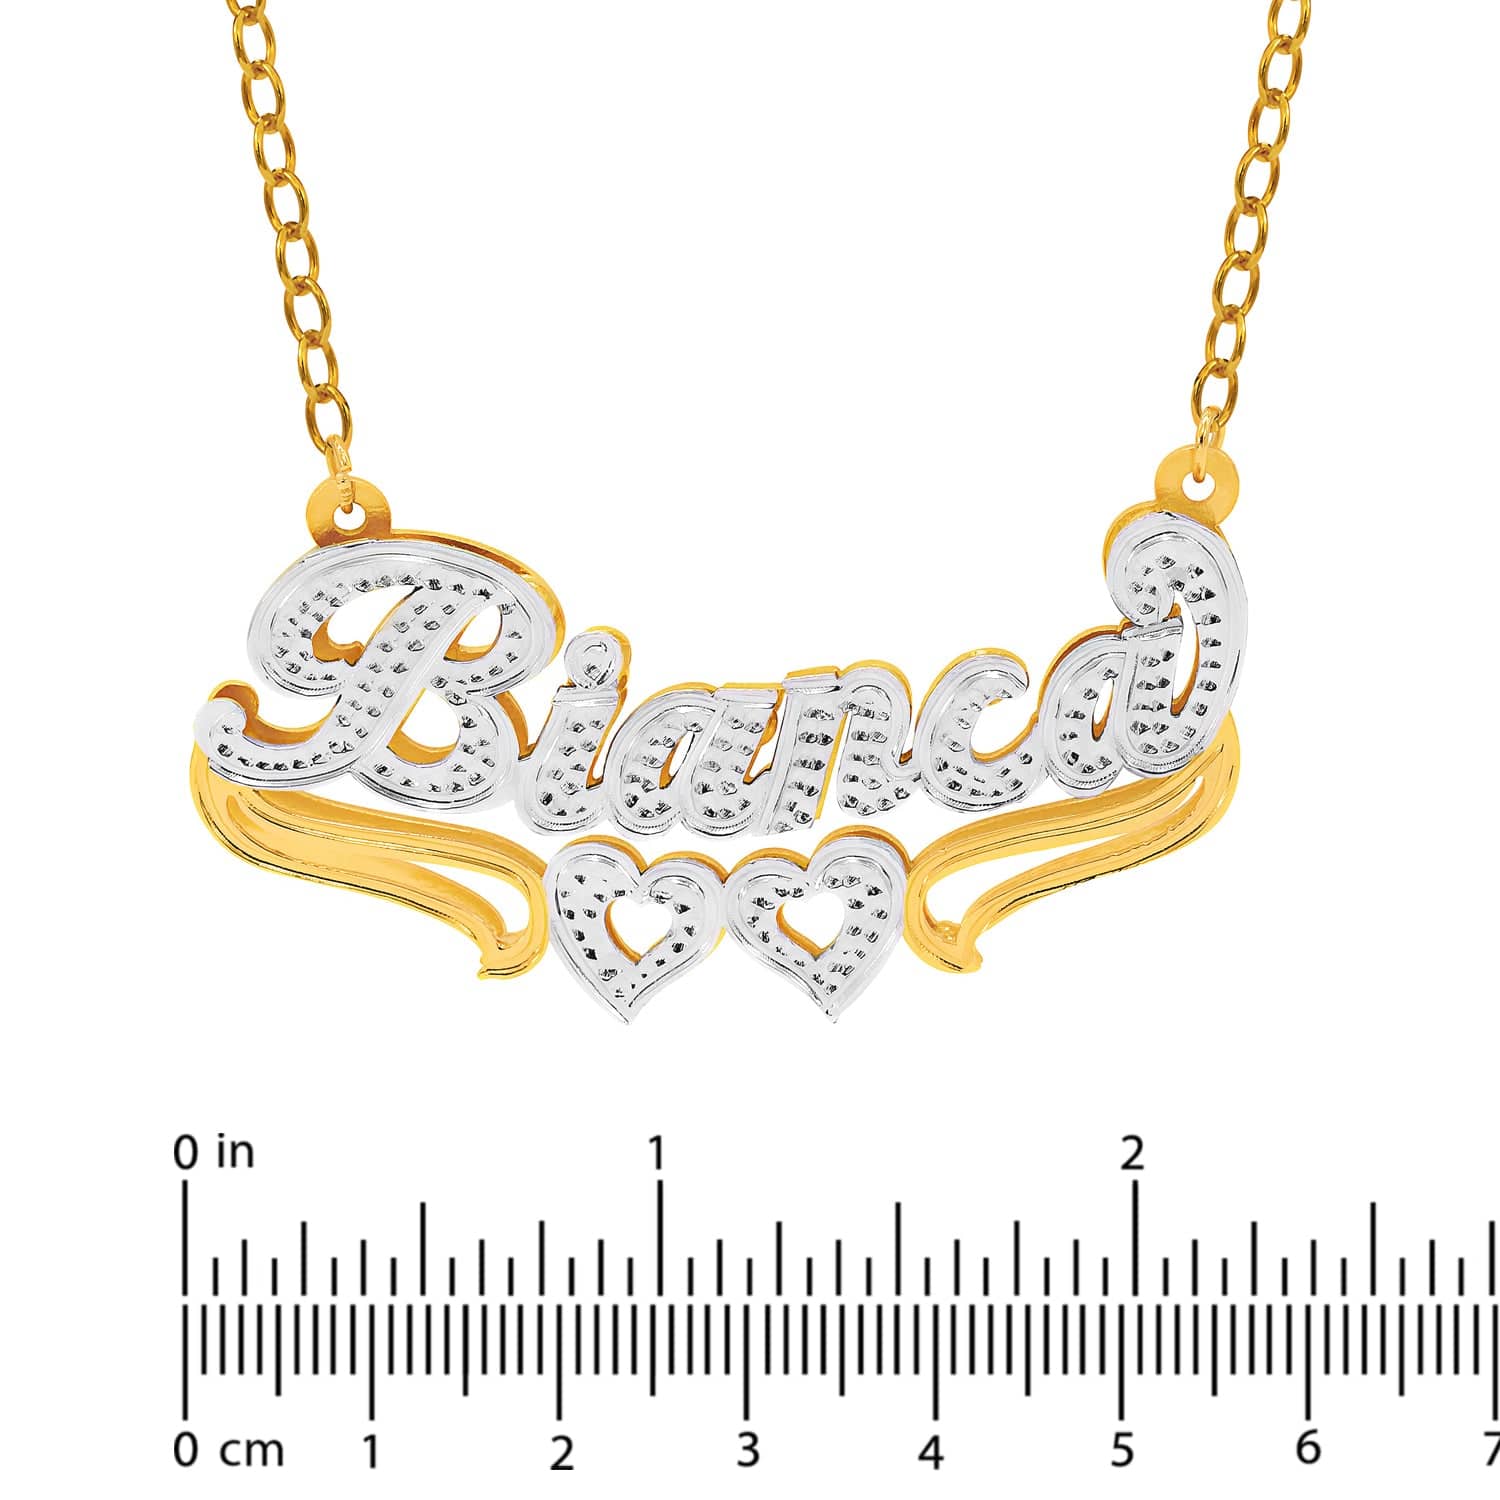 Double Nameplate "Bianca" Style Necklace